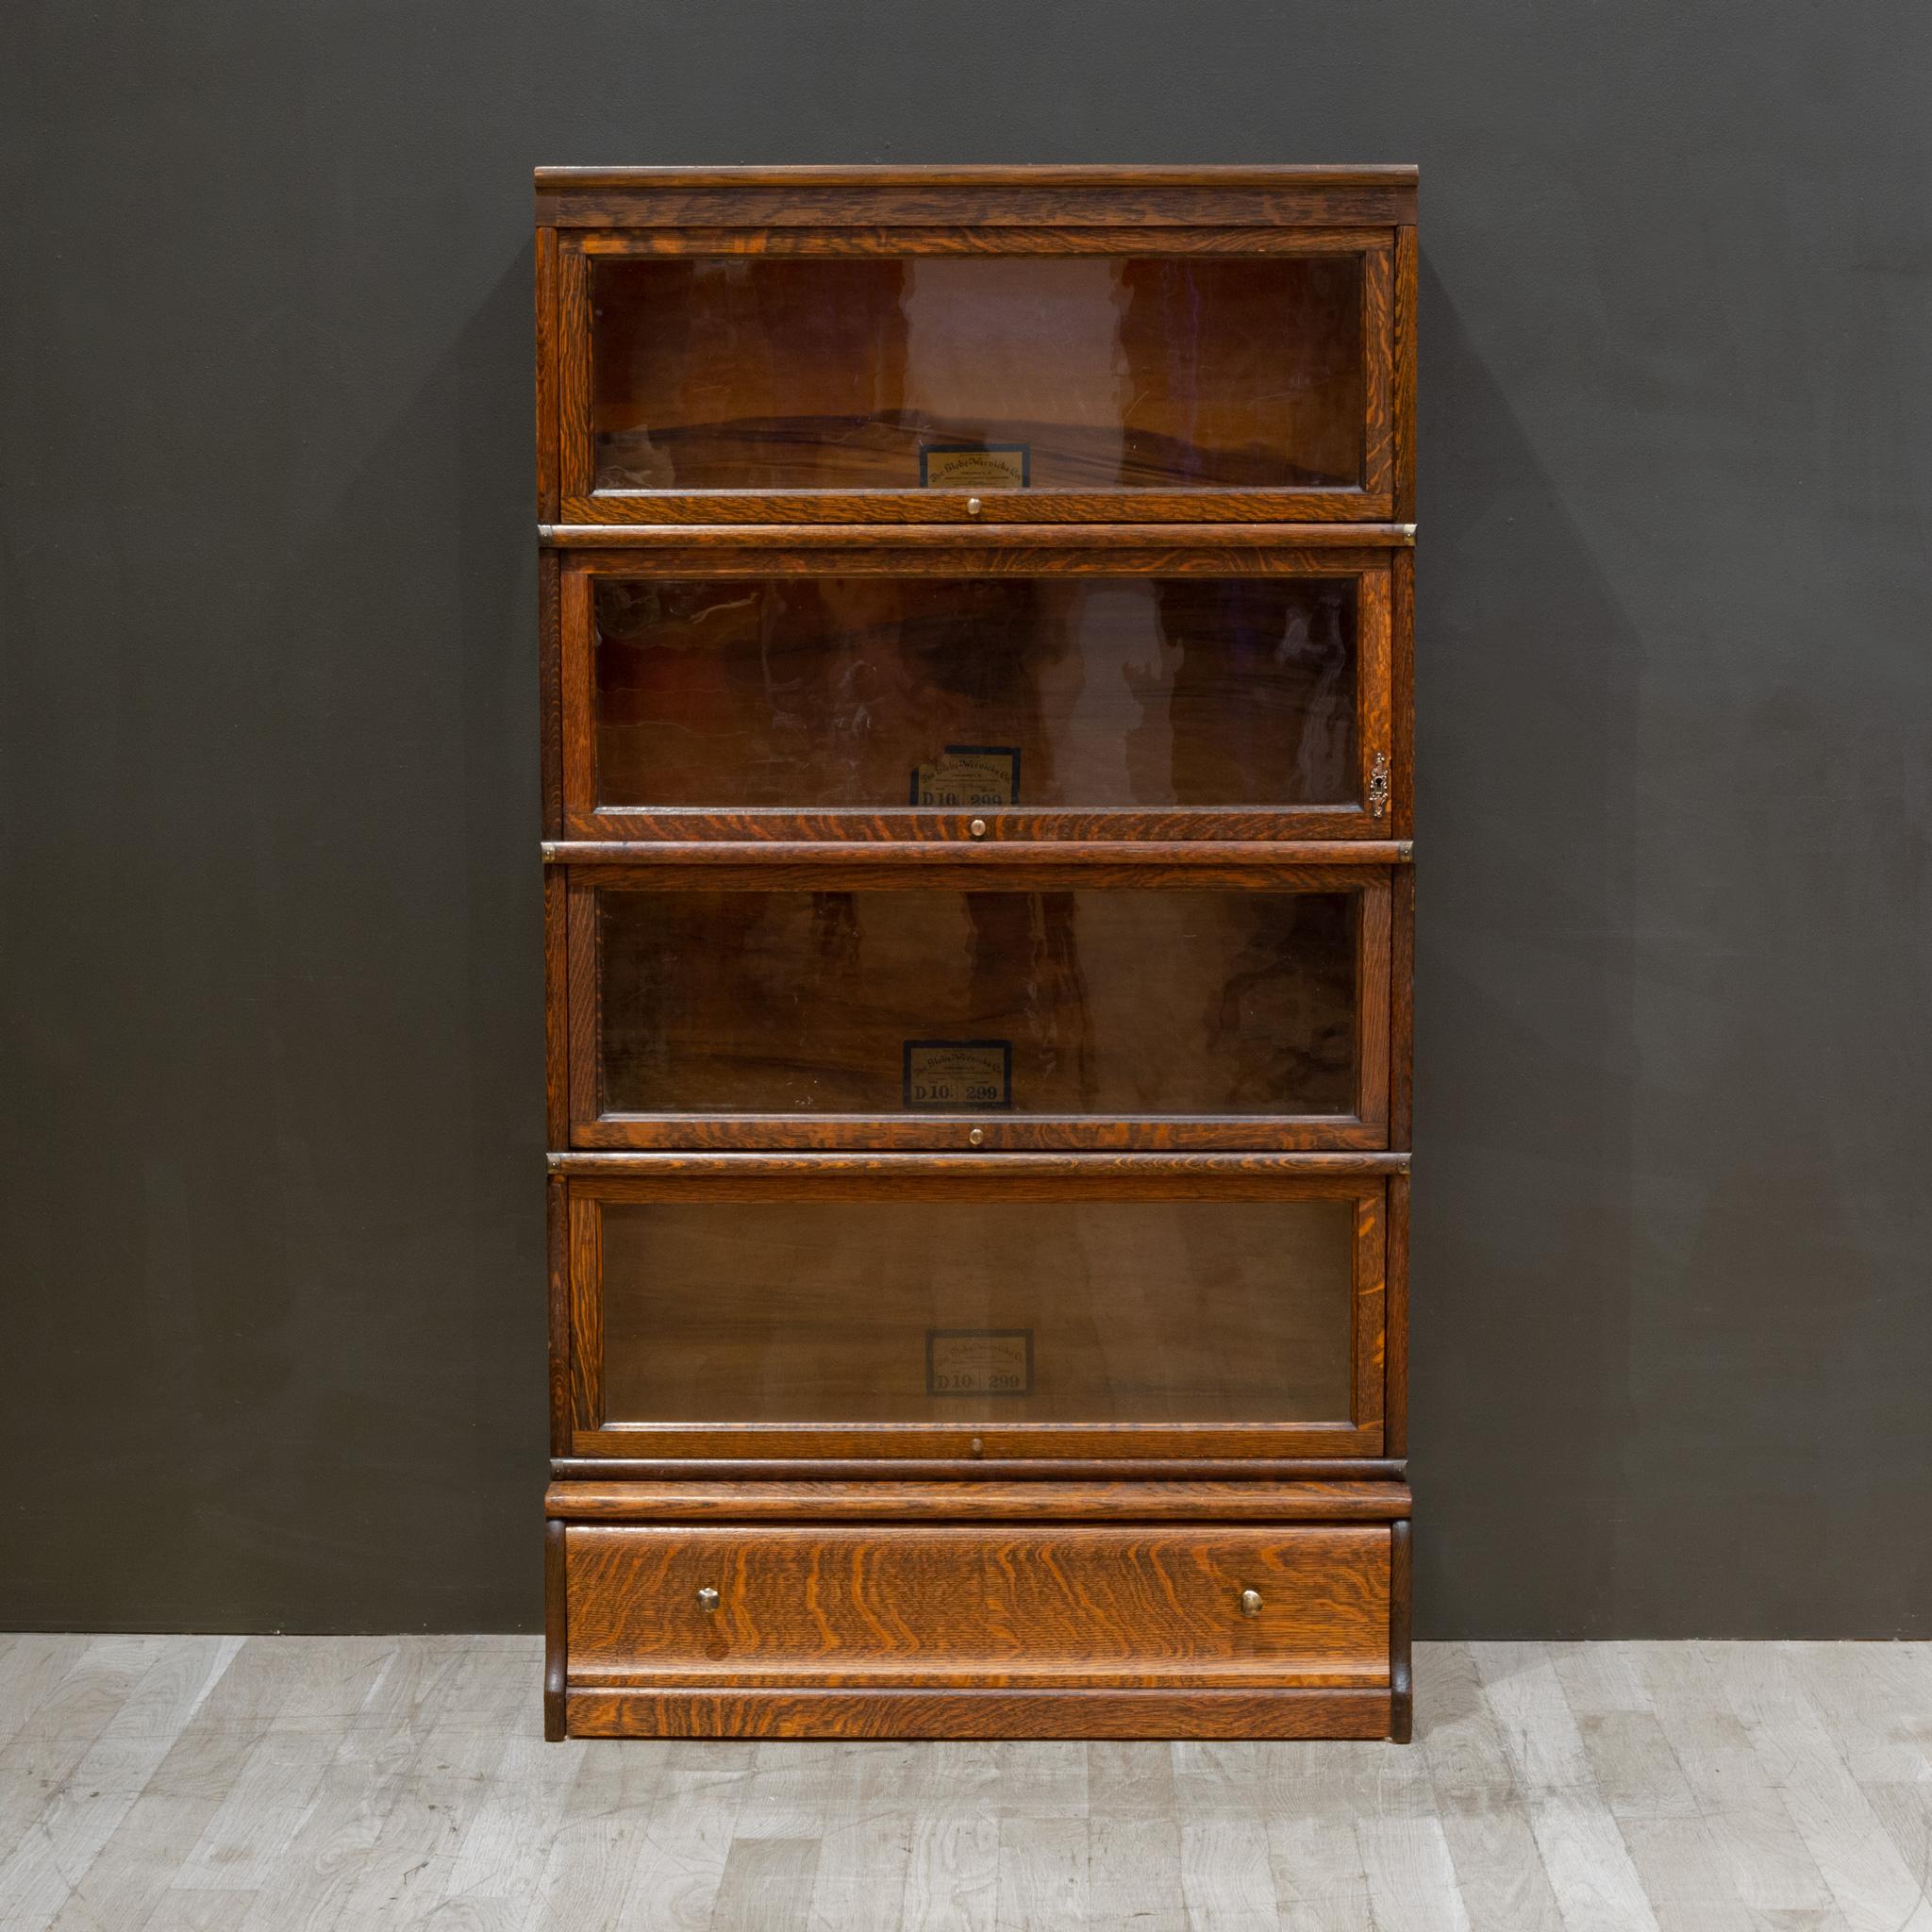 Industrial Globe-Wernicke 4 Stack Lawyer's Bookcase with Rare Bottom Drawer c.1910